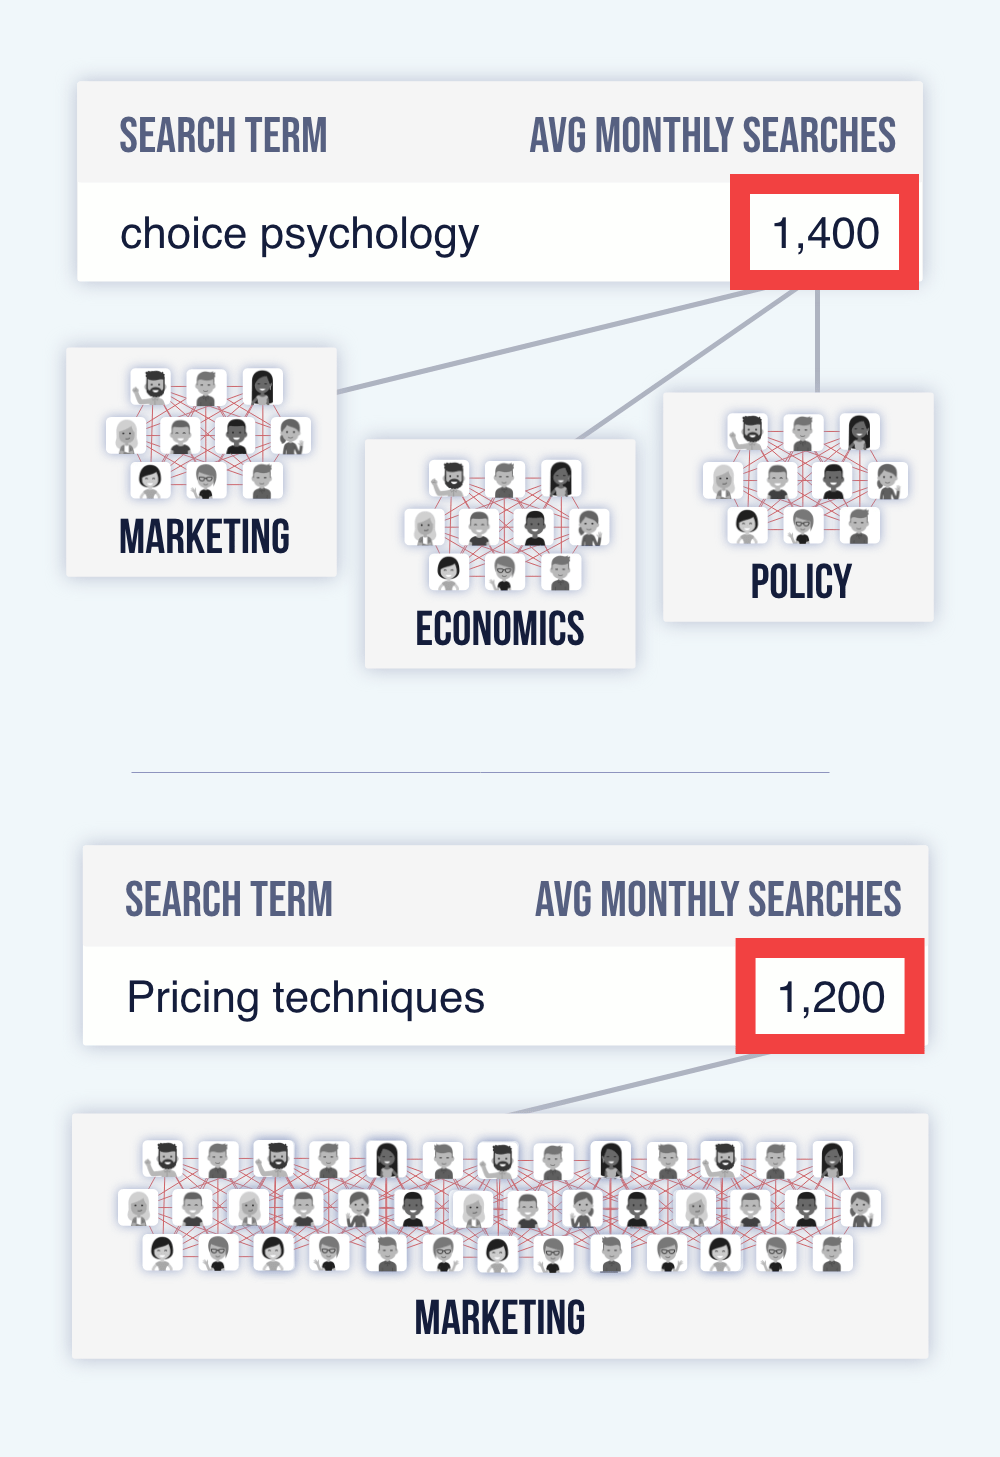 "Choice psychology" has 1,400 searches each month but a fragmented audience of people who work in marketing, economics, and public policy. "Pricing techniques" has 1,200 searches each month, but a more distinct segment of marketers